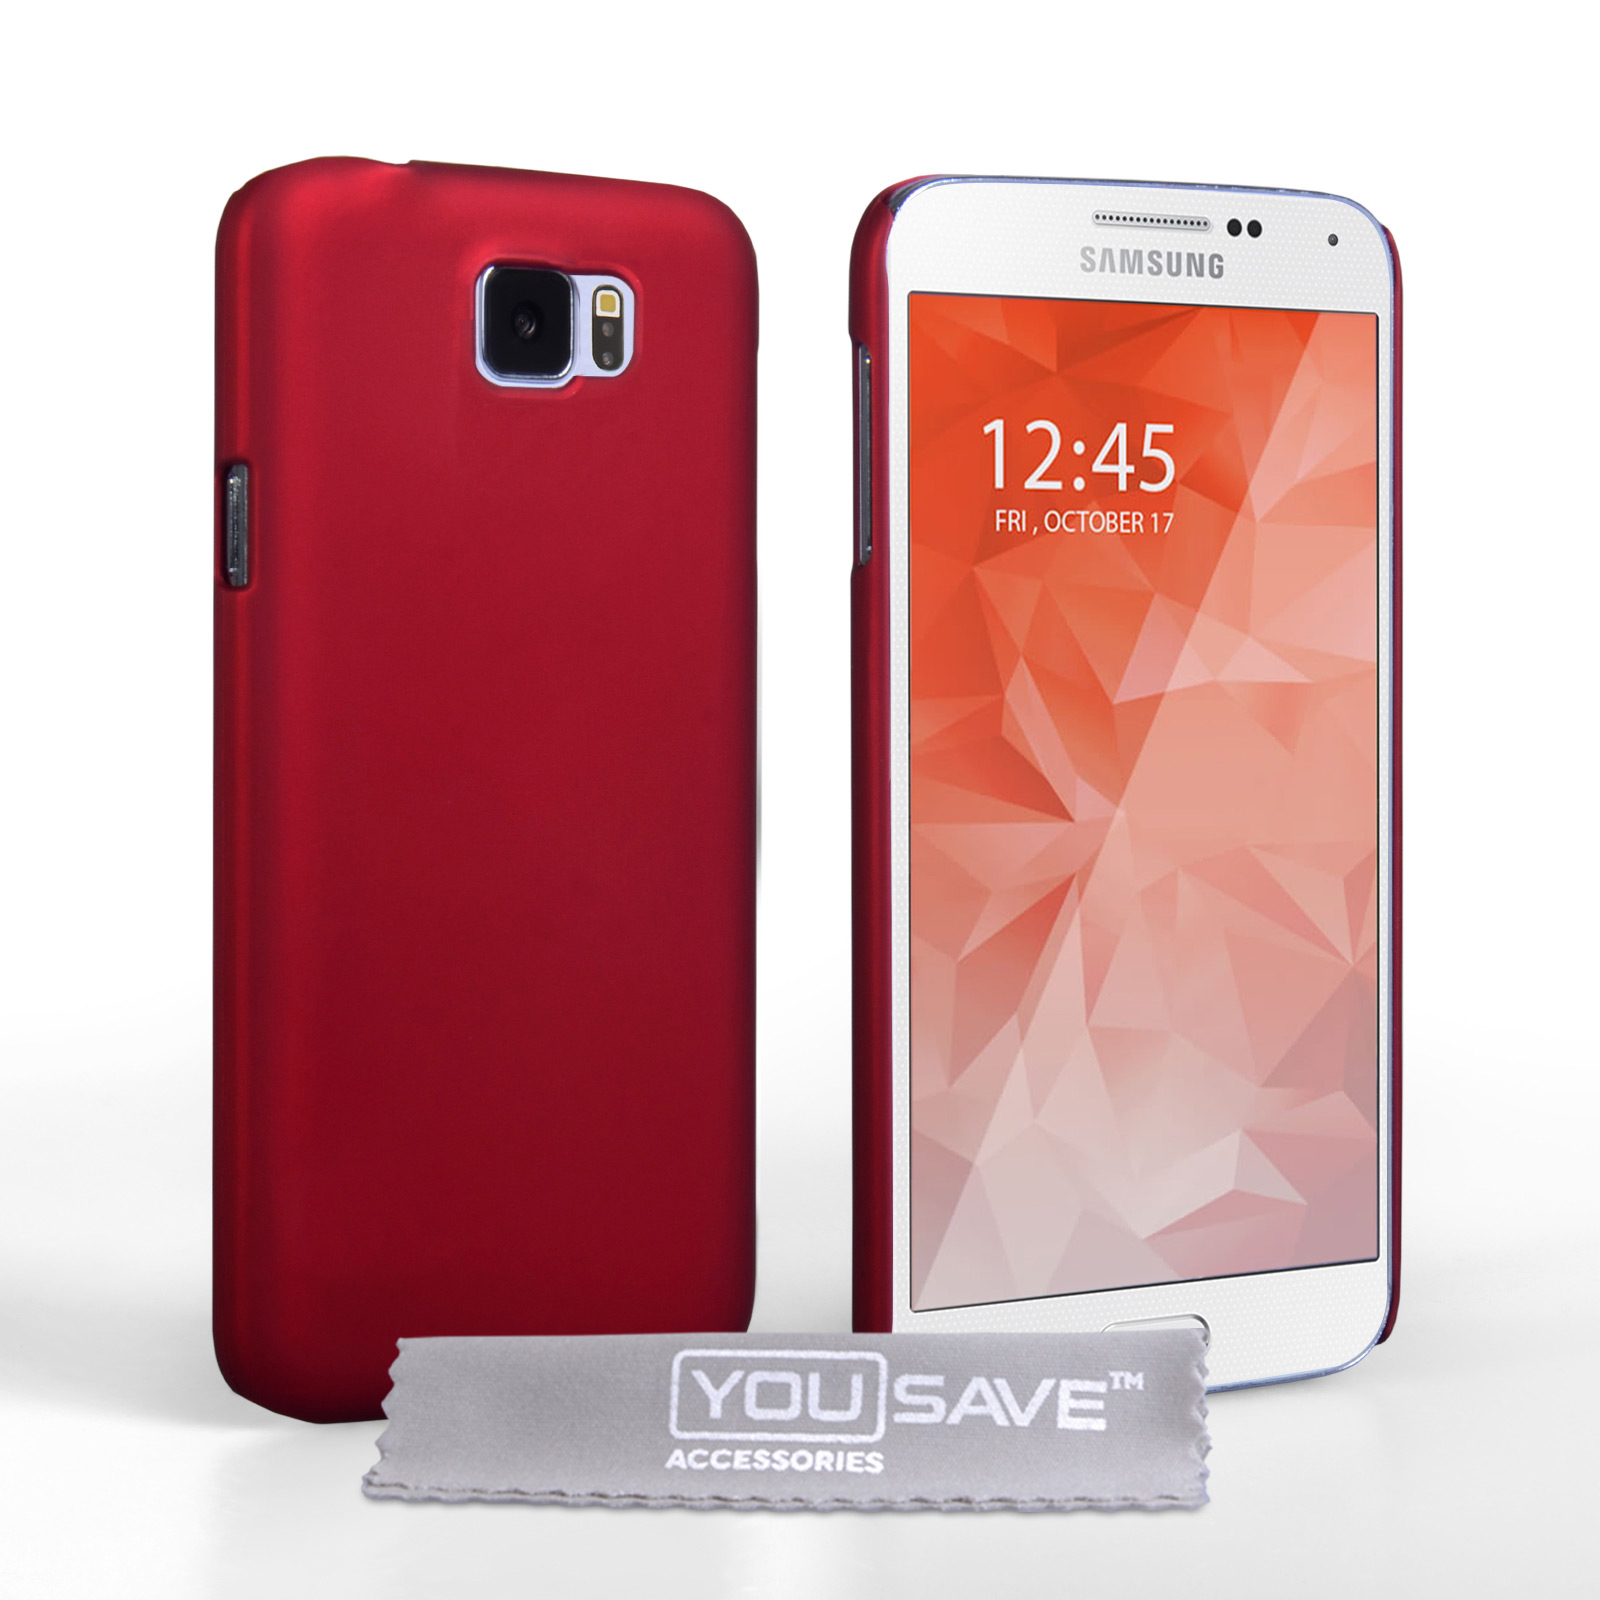 YouSave Accessories Samsung Galaxy S6 Hard Hybrid Case - Red